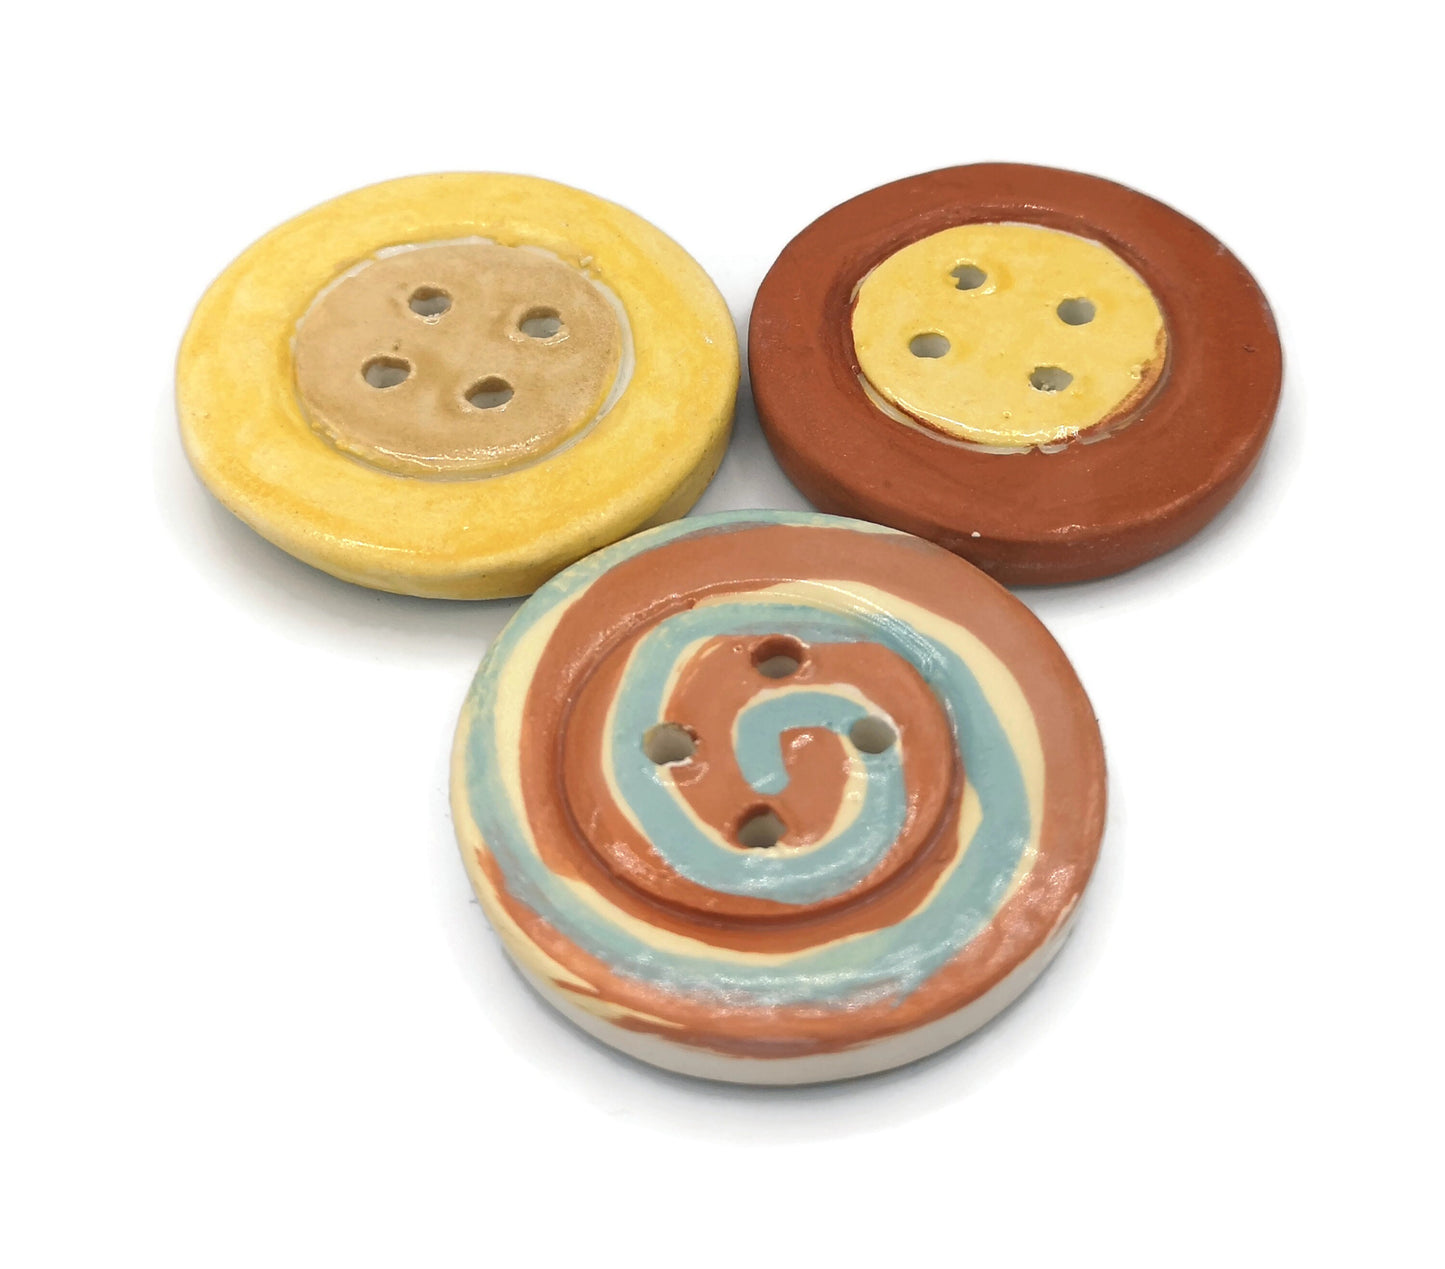 3Pc 45mm Extra Large Handmade Ceramic Novelty Sewing Buttons, Strange And Unusual Hand Painted Clay Buttons Lot Round Coat Button Decorative - Ceramica Ana Rafael